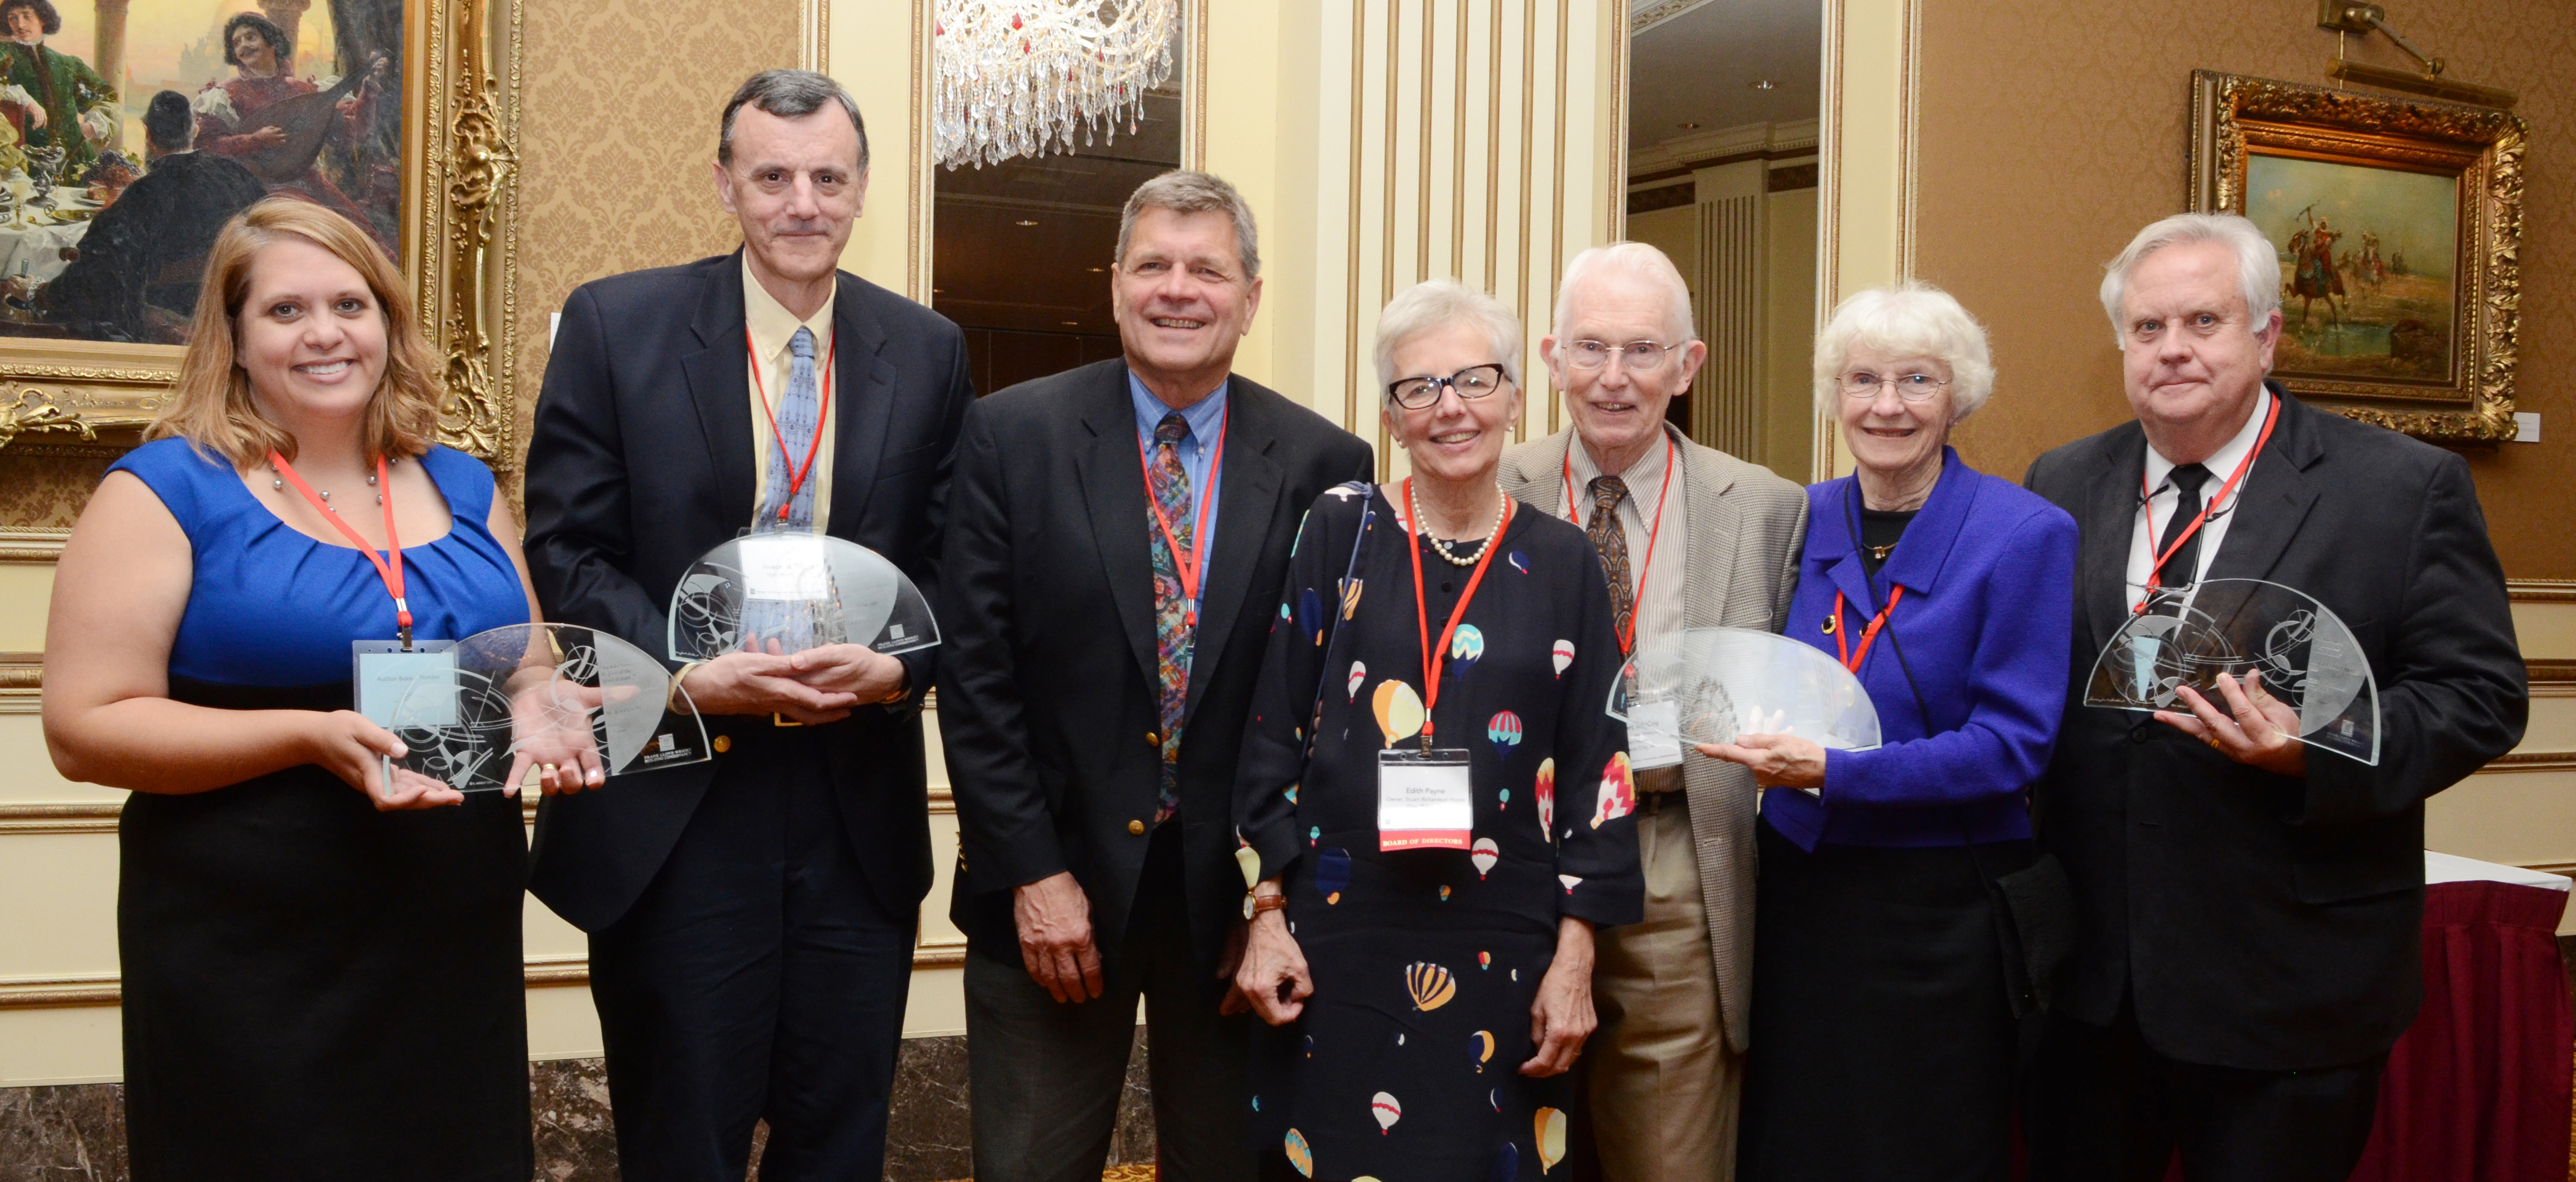 Siry, second from left, with his fellow honorees at the Wright Spirit Awards ceremony. (Photo by Mark Hertzberg)